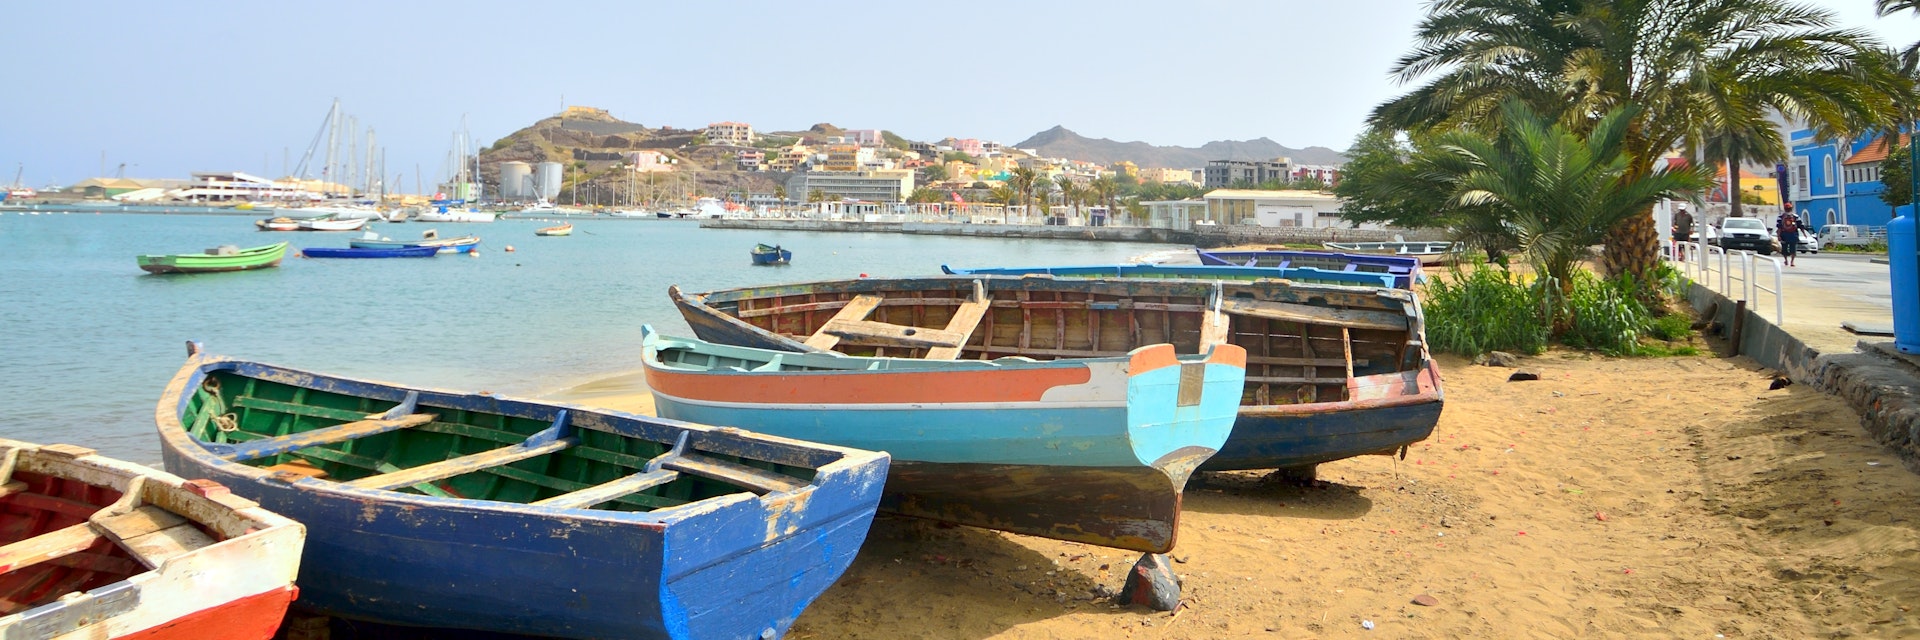 A collection of fishing boats beached on Mabota Beach in Mindelo with more luxurious sailboats in the background